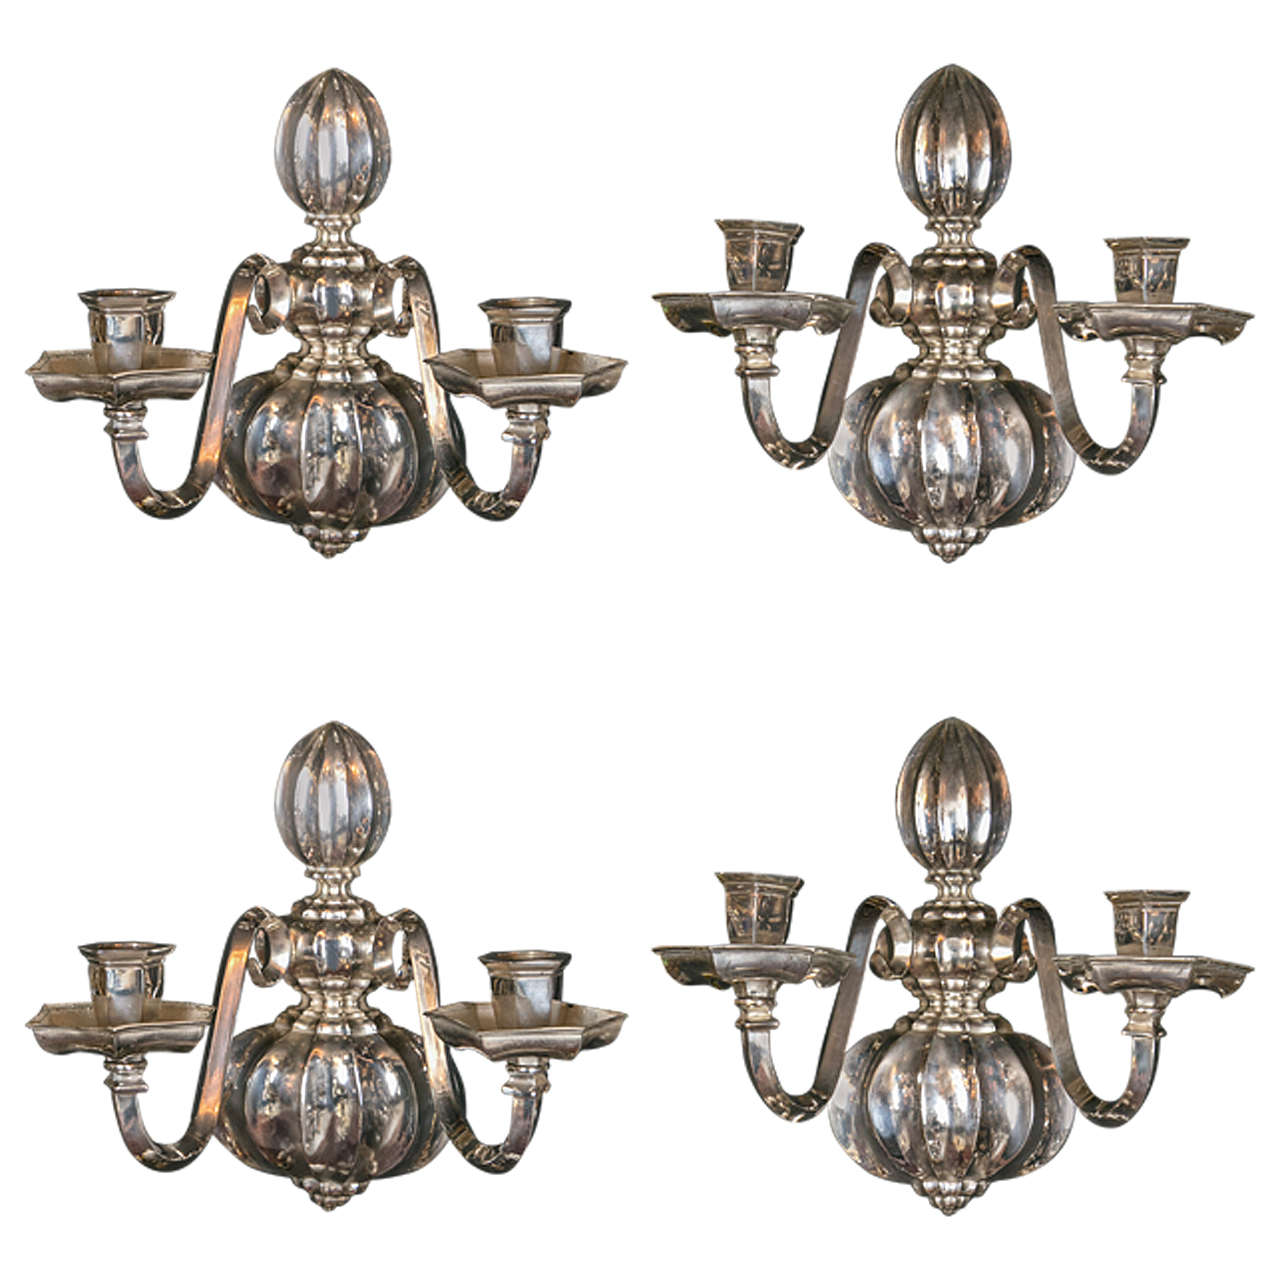 Pair of Caldwell Silverplated Sconces, circa 1920 For Sale